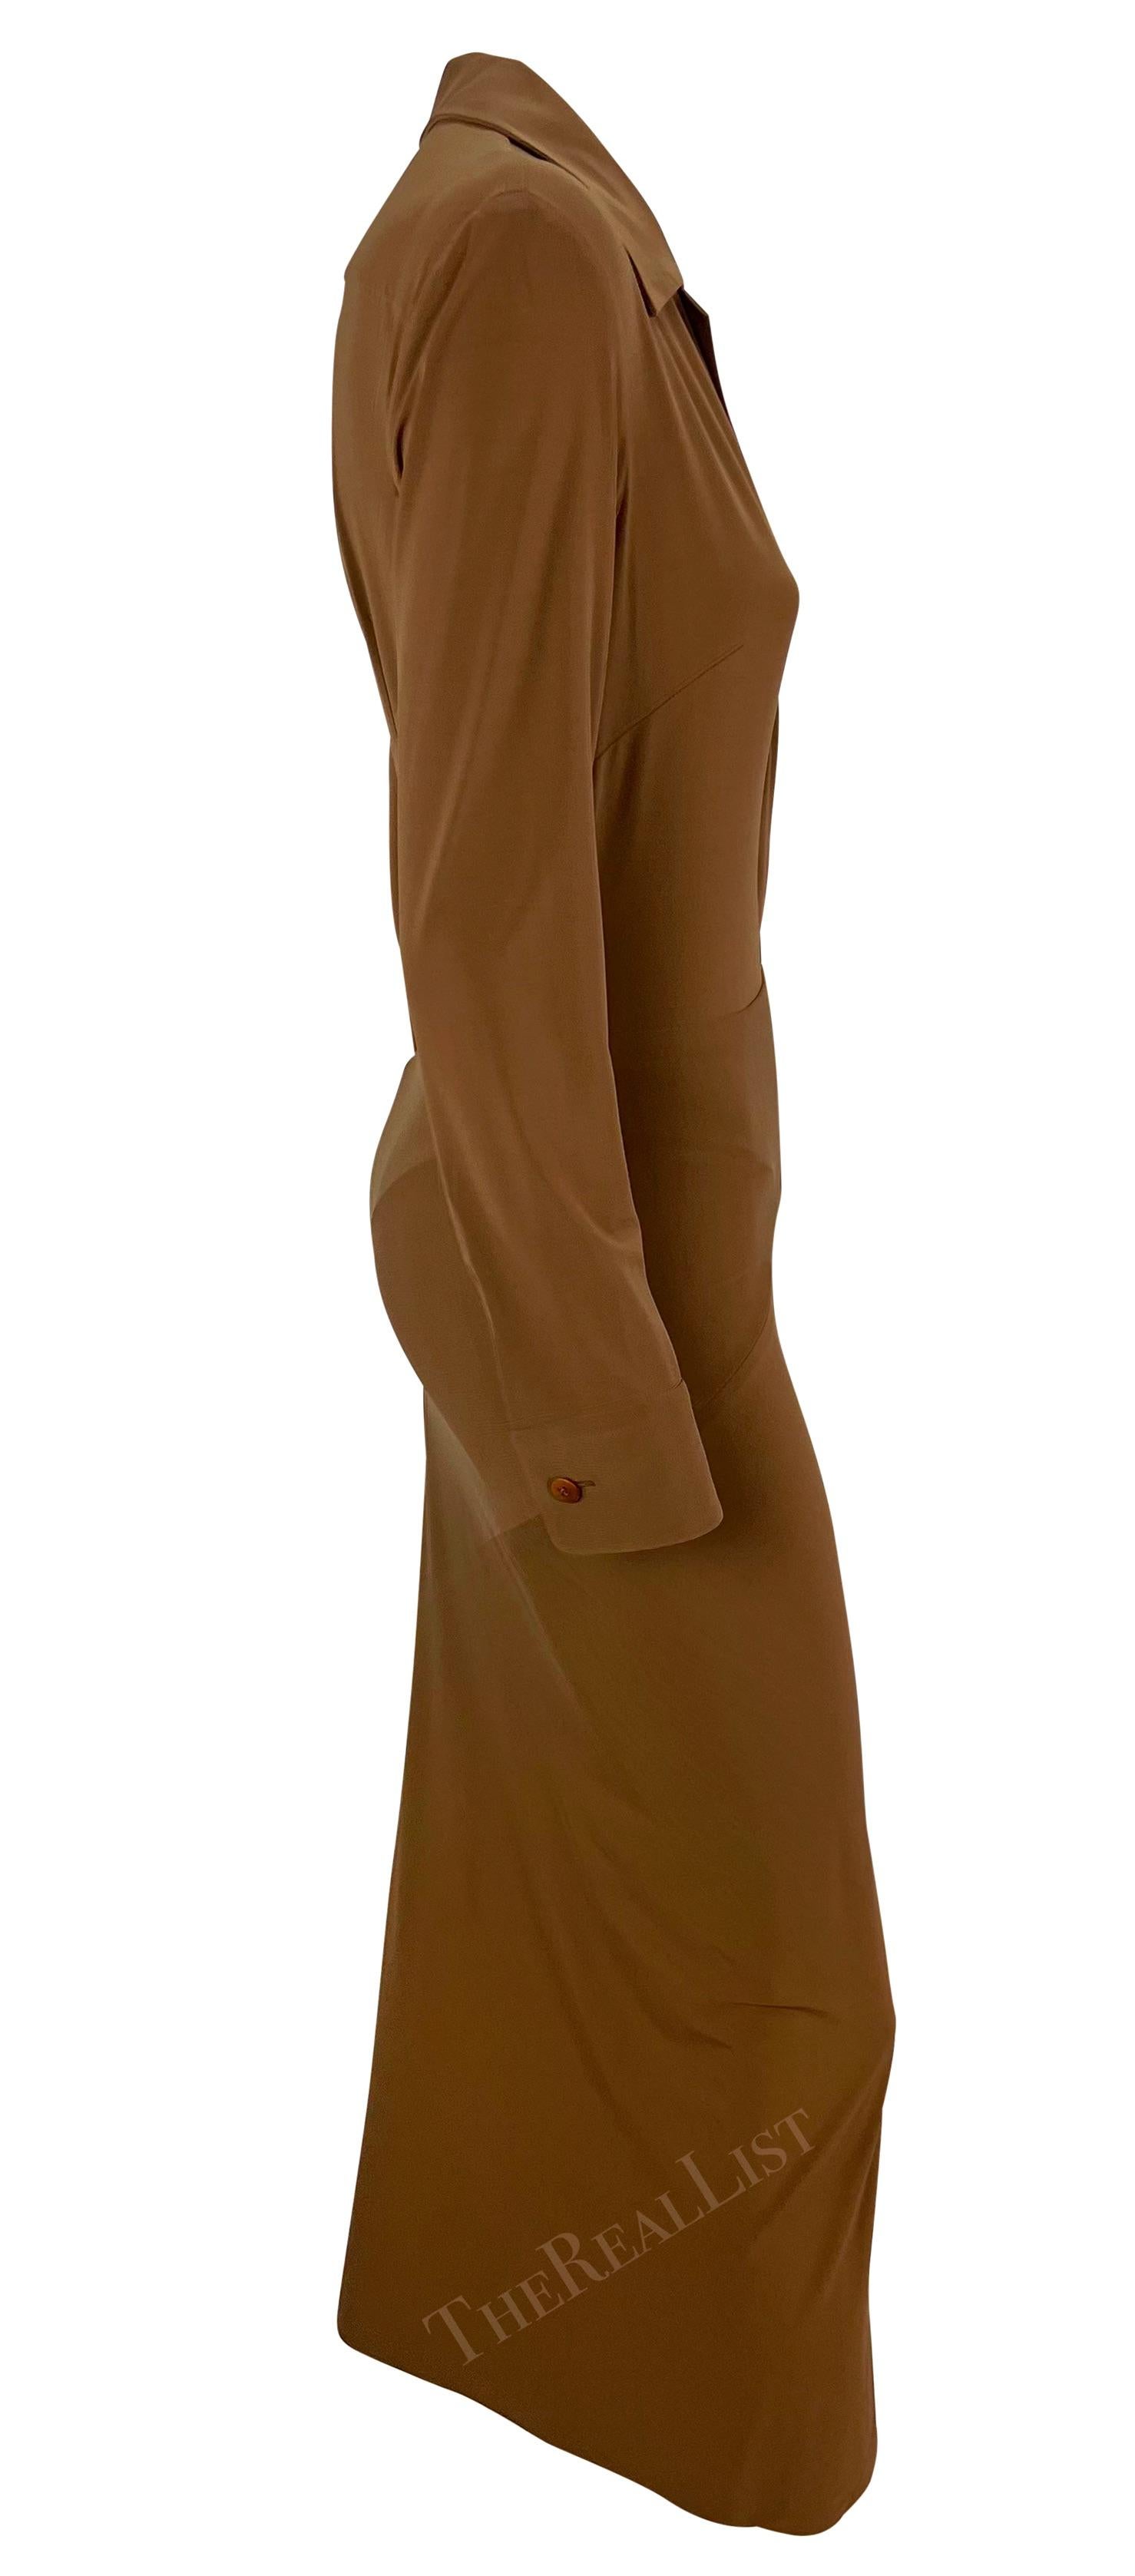 S/S 1996 Donna Karan Runway Light Brown Plunging Bodycon Dress For Sale 4